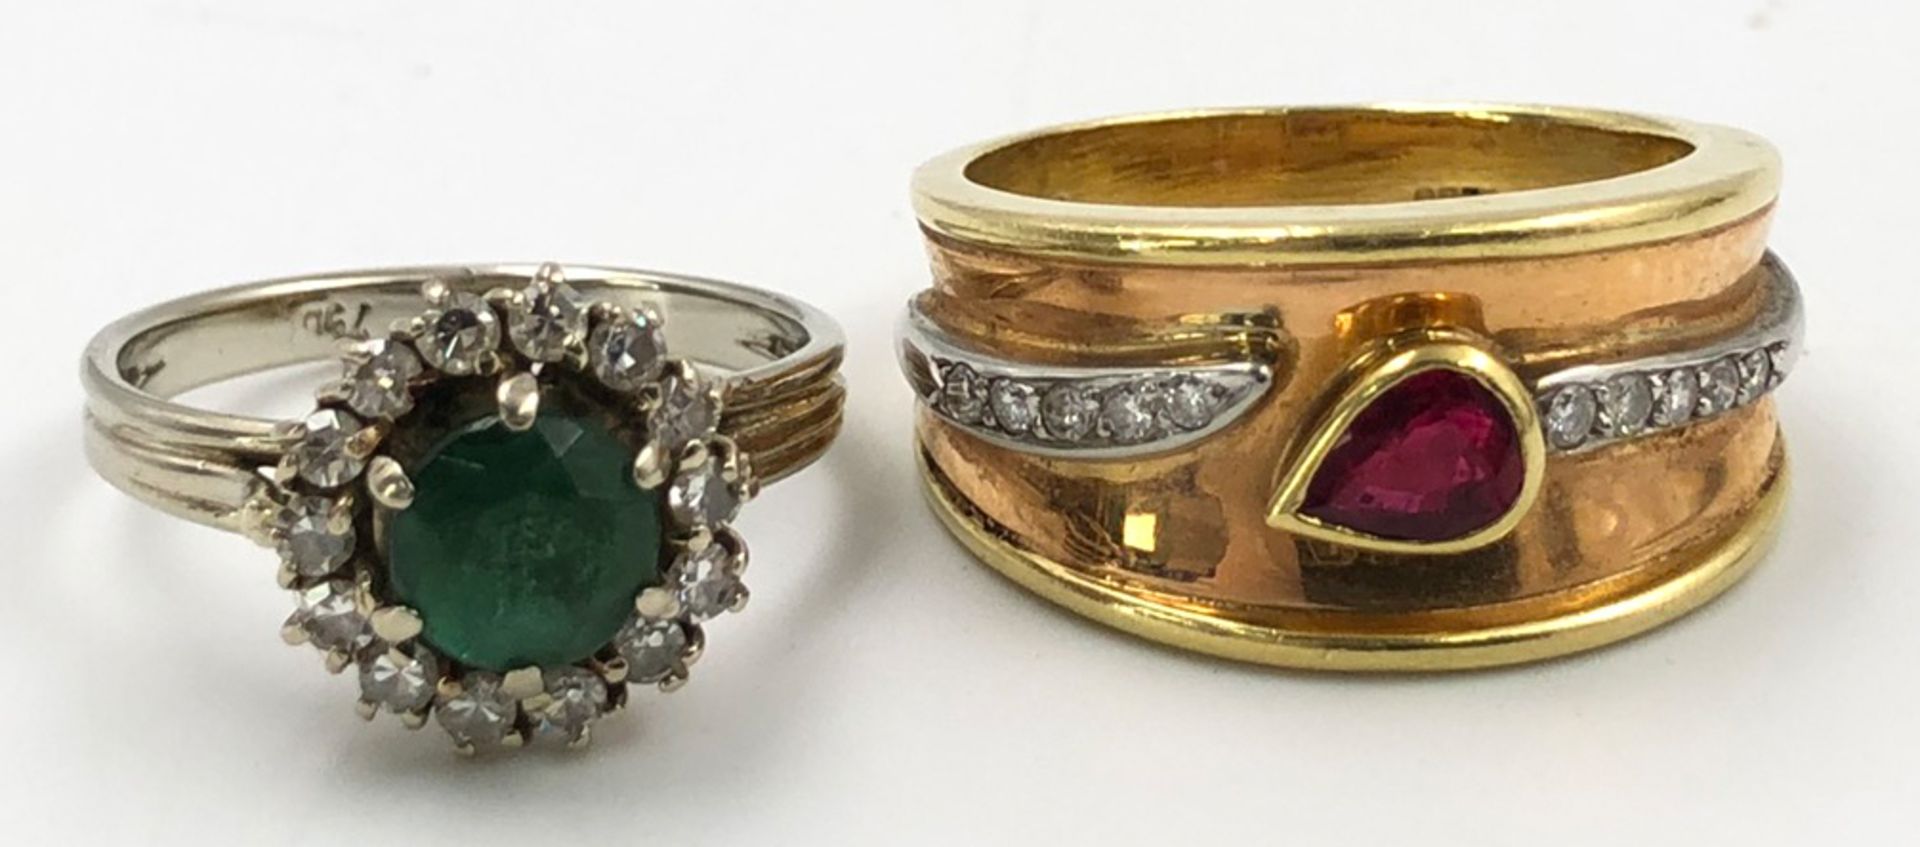 2 rings. 750 gold. 12.6 grams gross.Emerald (proably treated) surrounded by 15 brilliant-cut